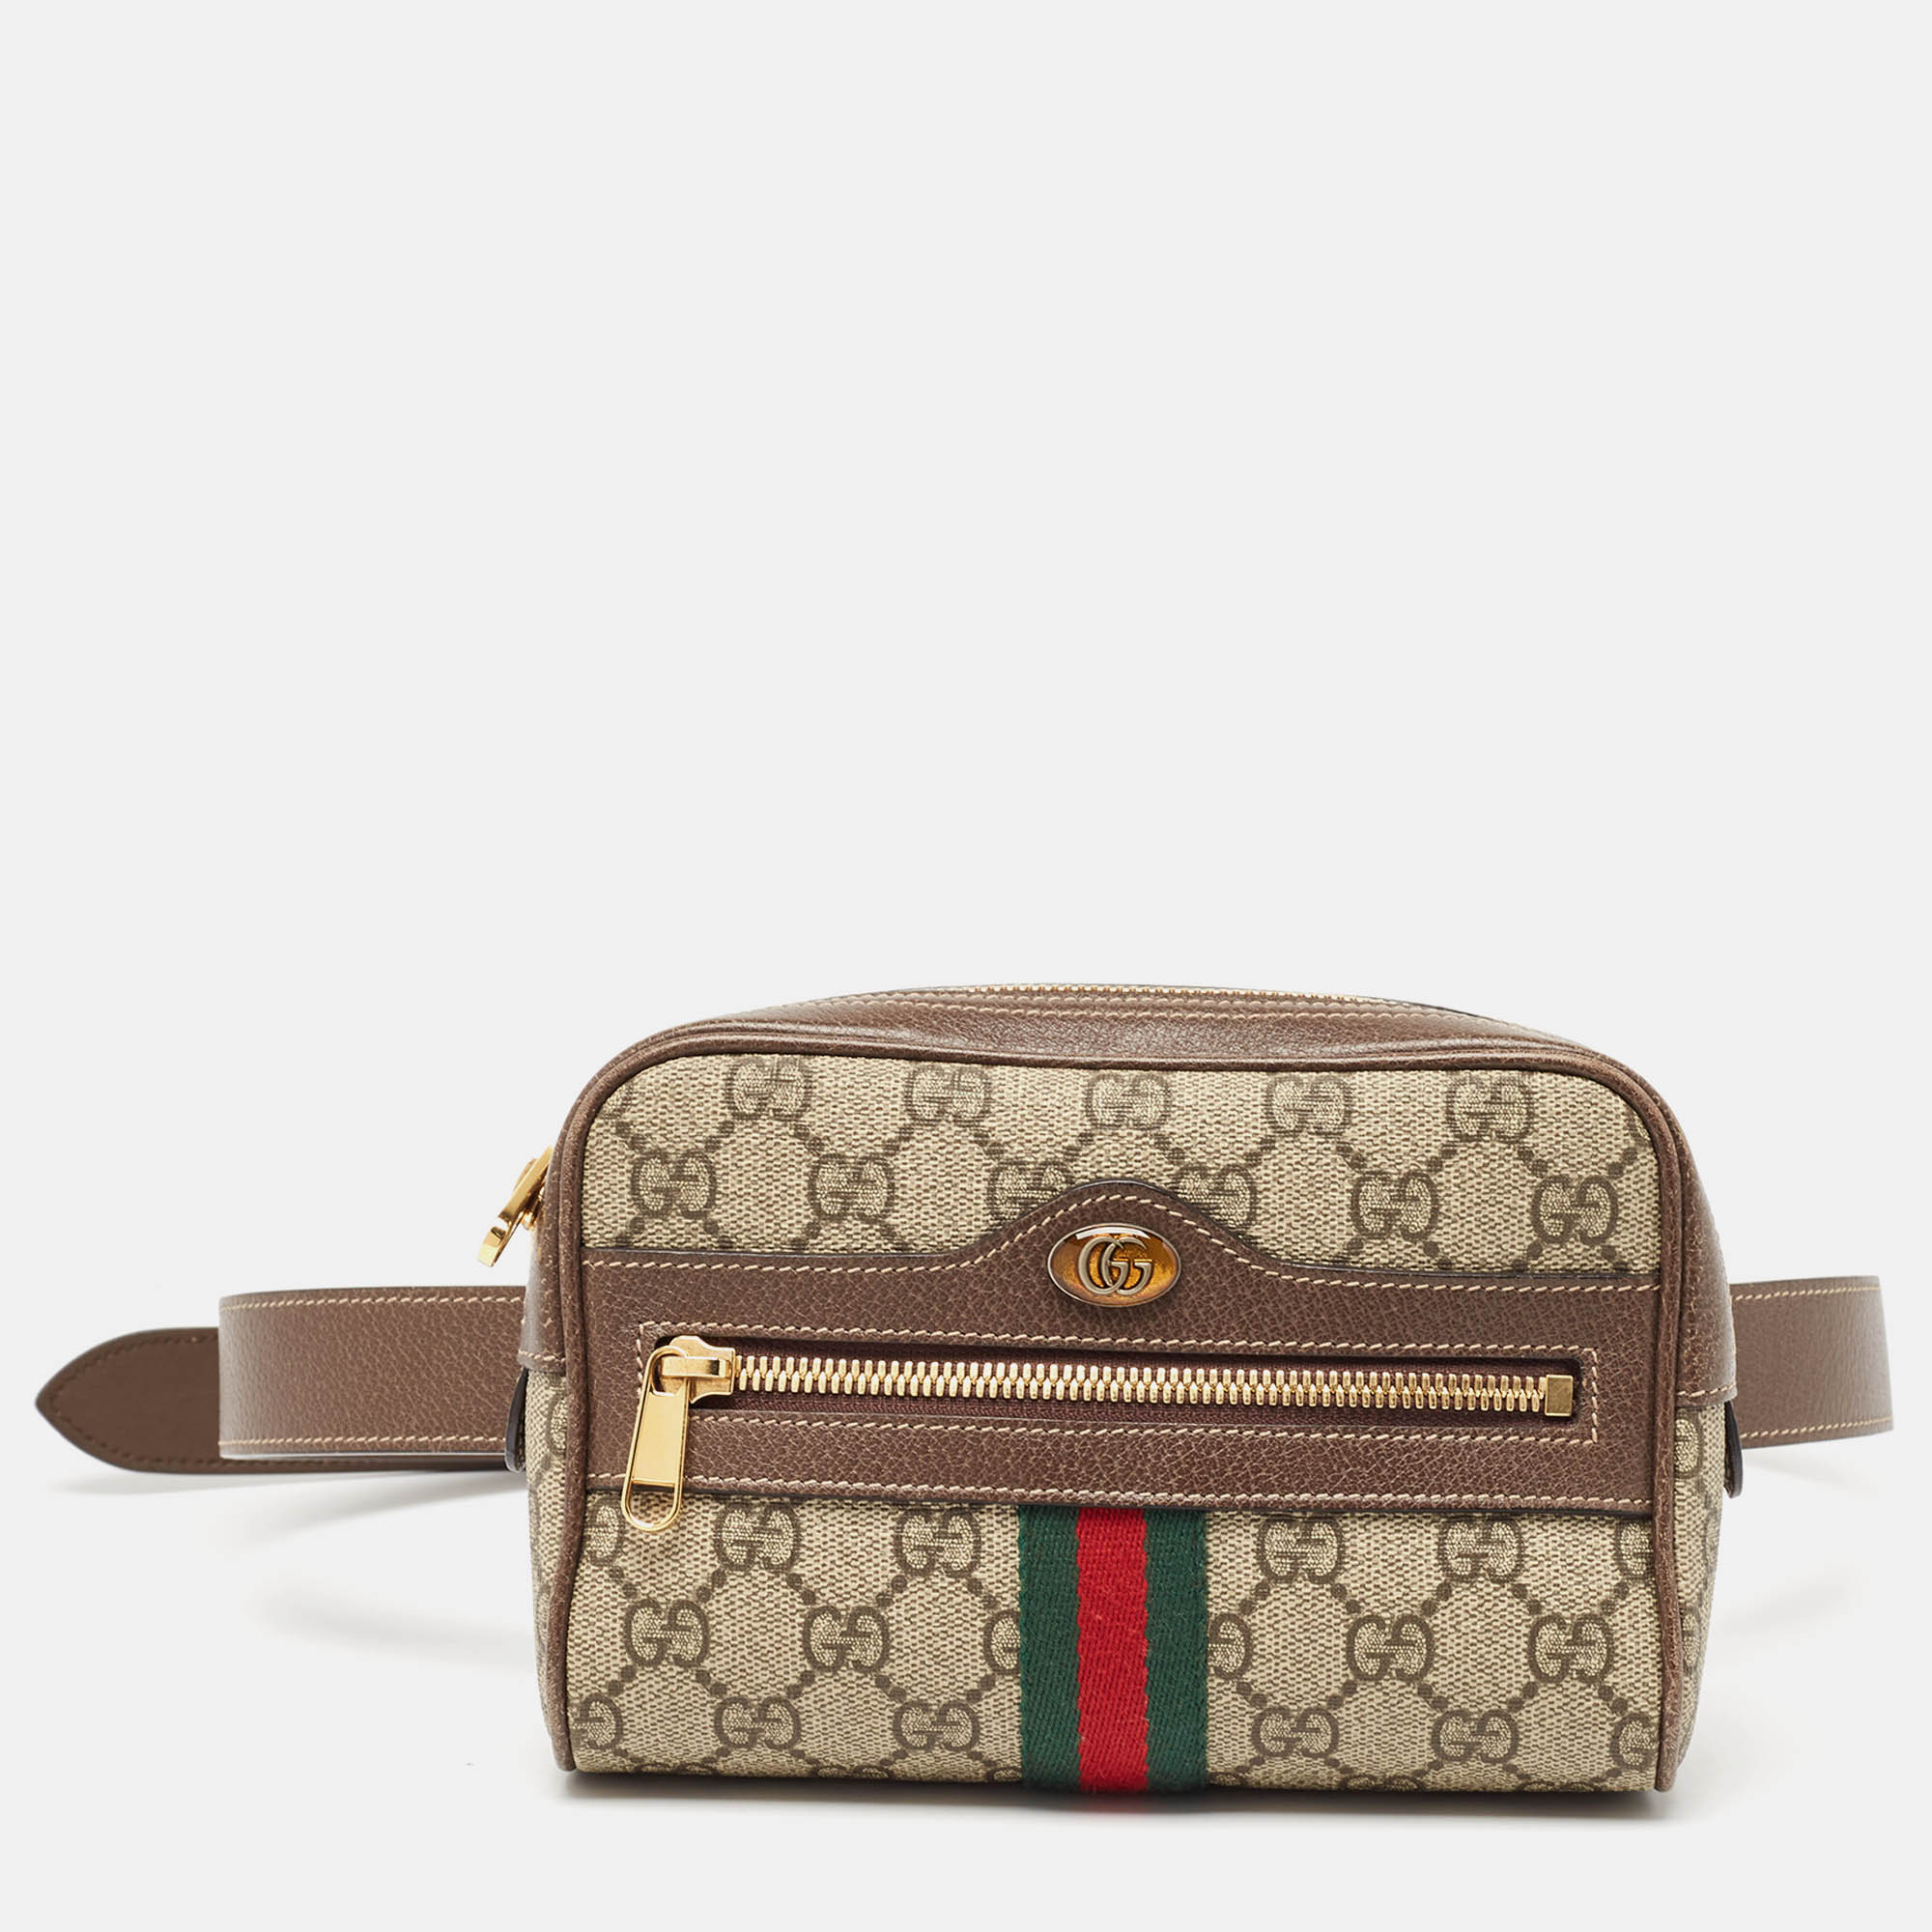 Every creation from Gucci is noteworthy for its timeless charm and versatile design. Created from GG Supreme canvas and leather this Gucci Ophidia belt bag is imbued with heritage details. The Web stripe detailing and the branded motif on the front give it a luxe update.